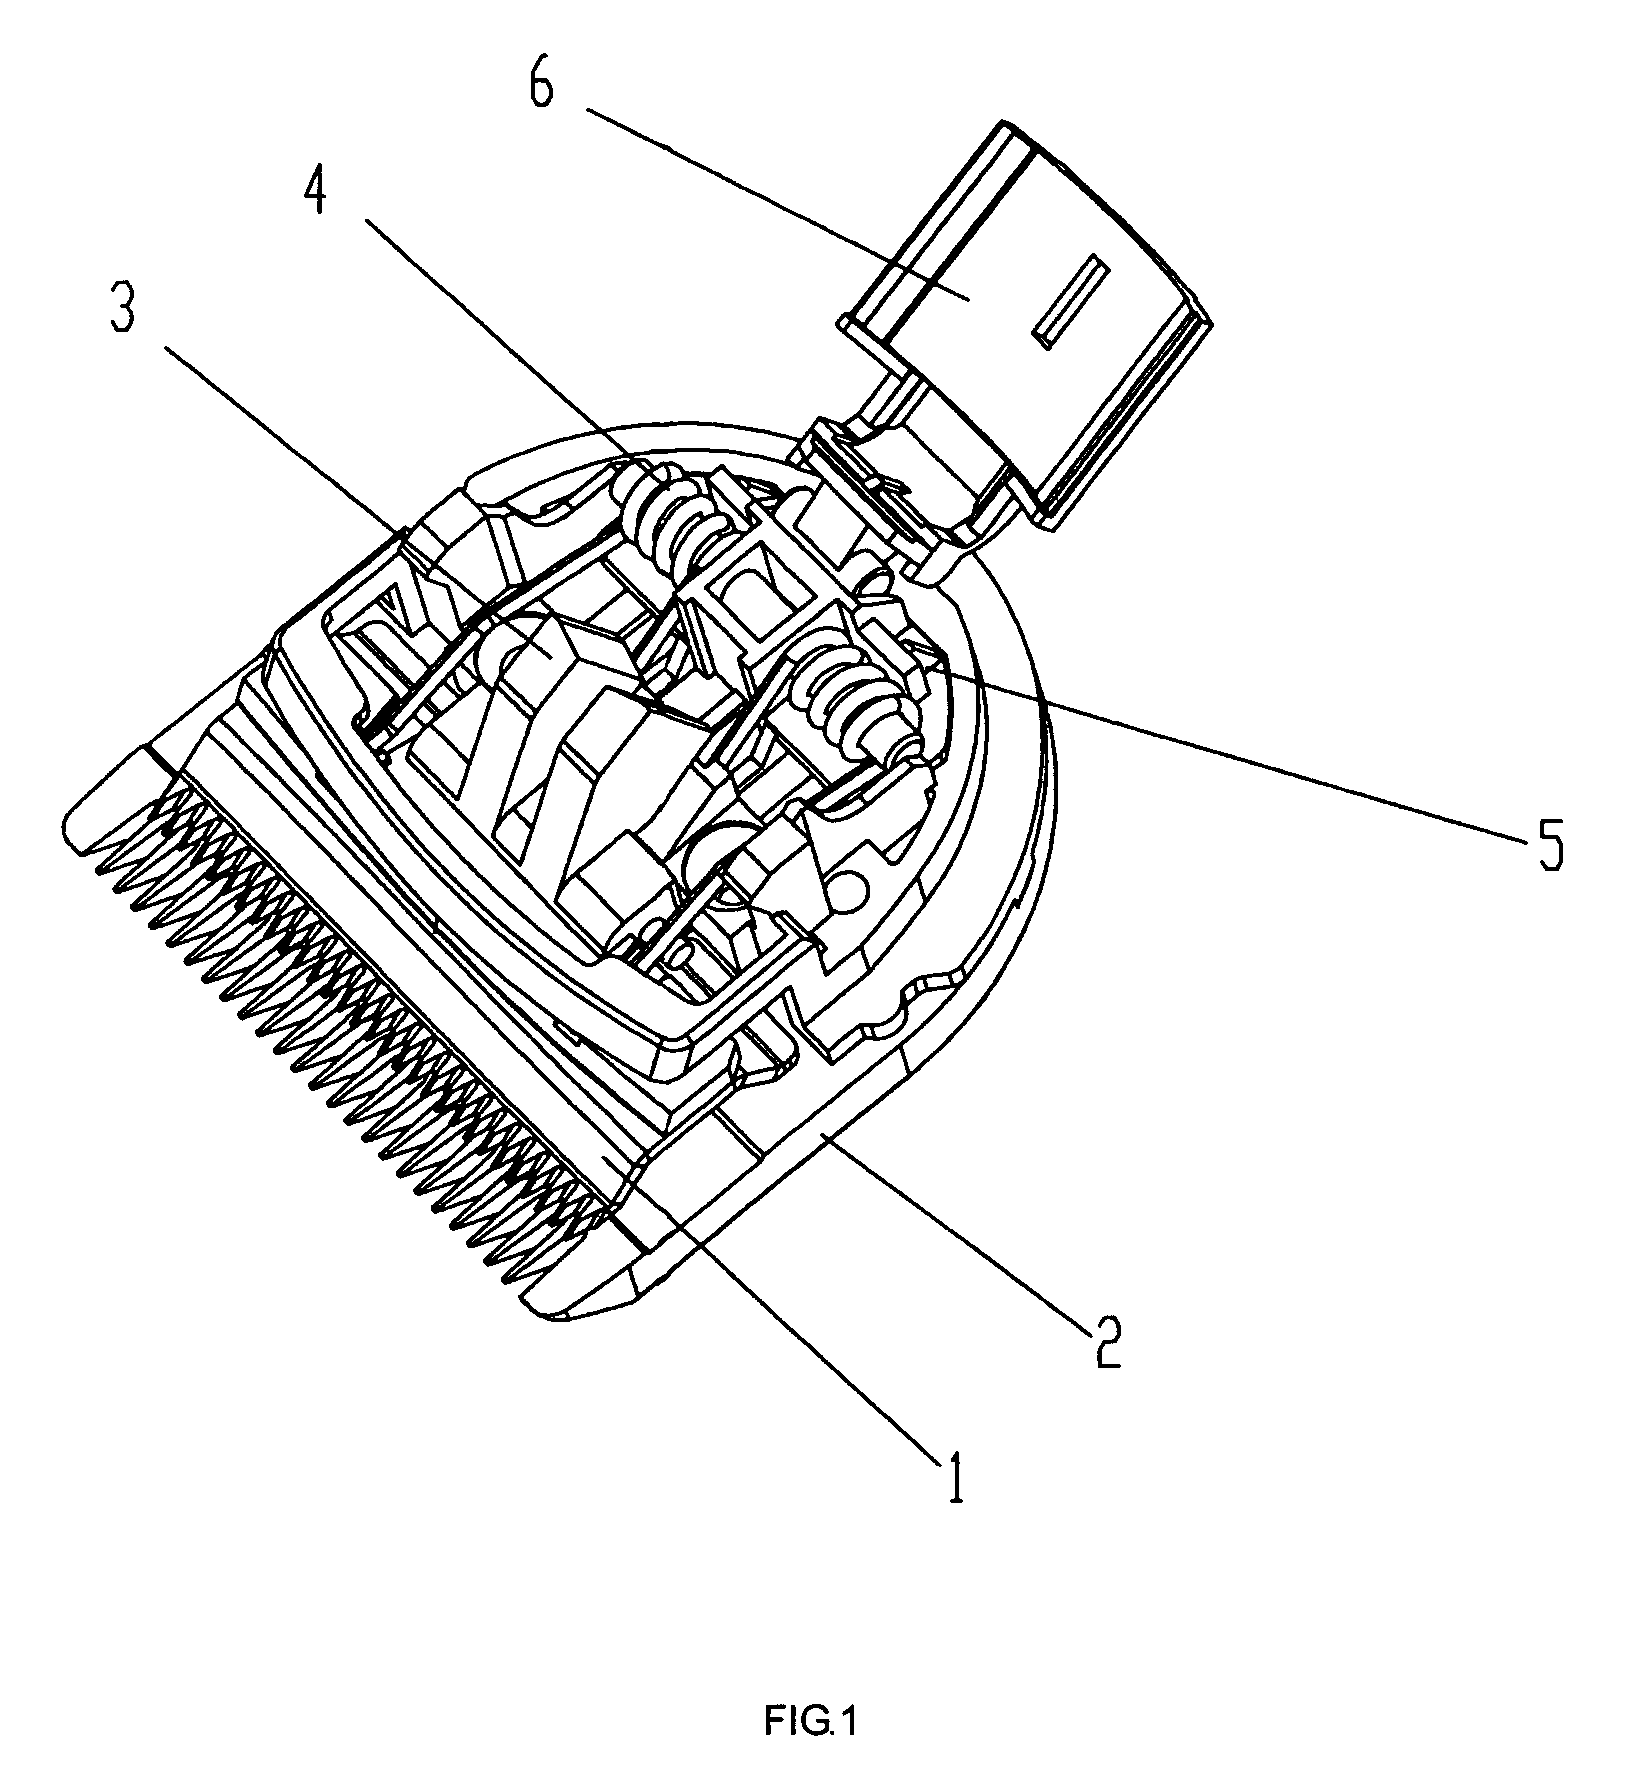 Blade driving assembly for an adjustable hair clipper